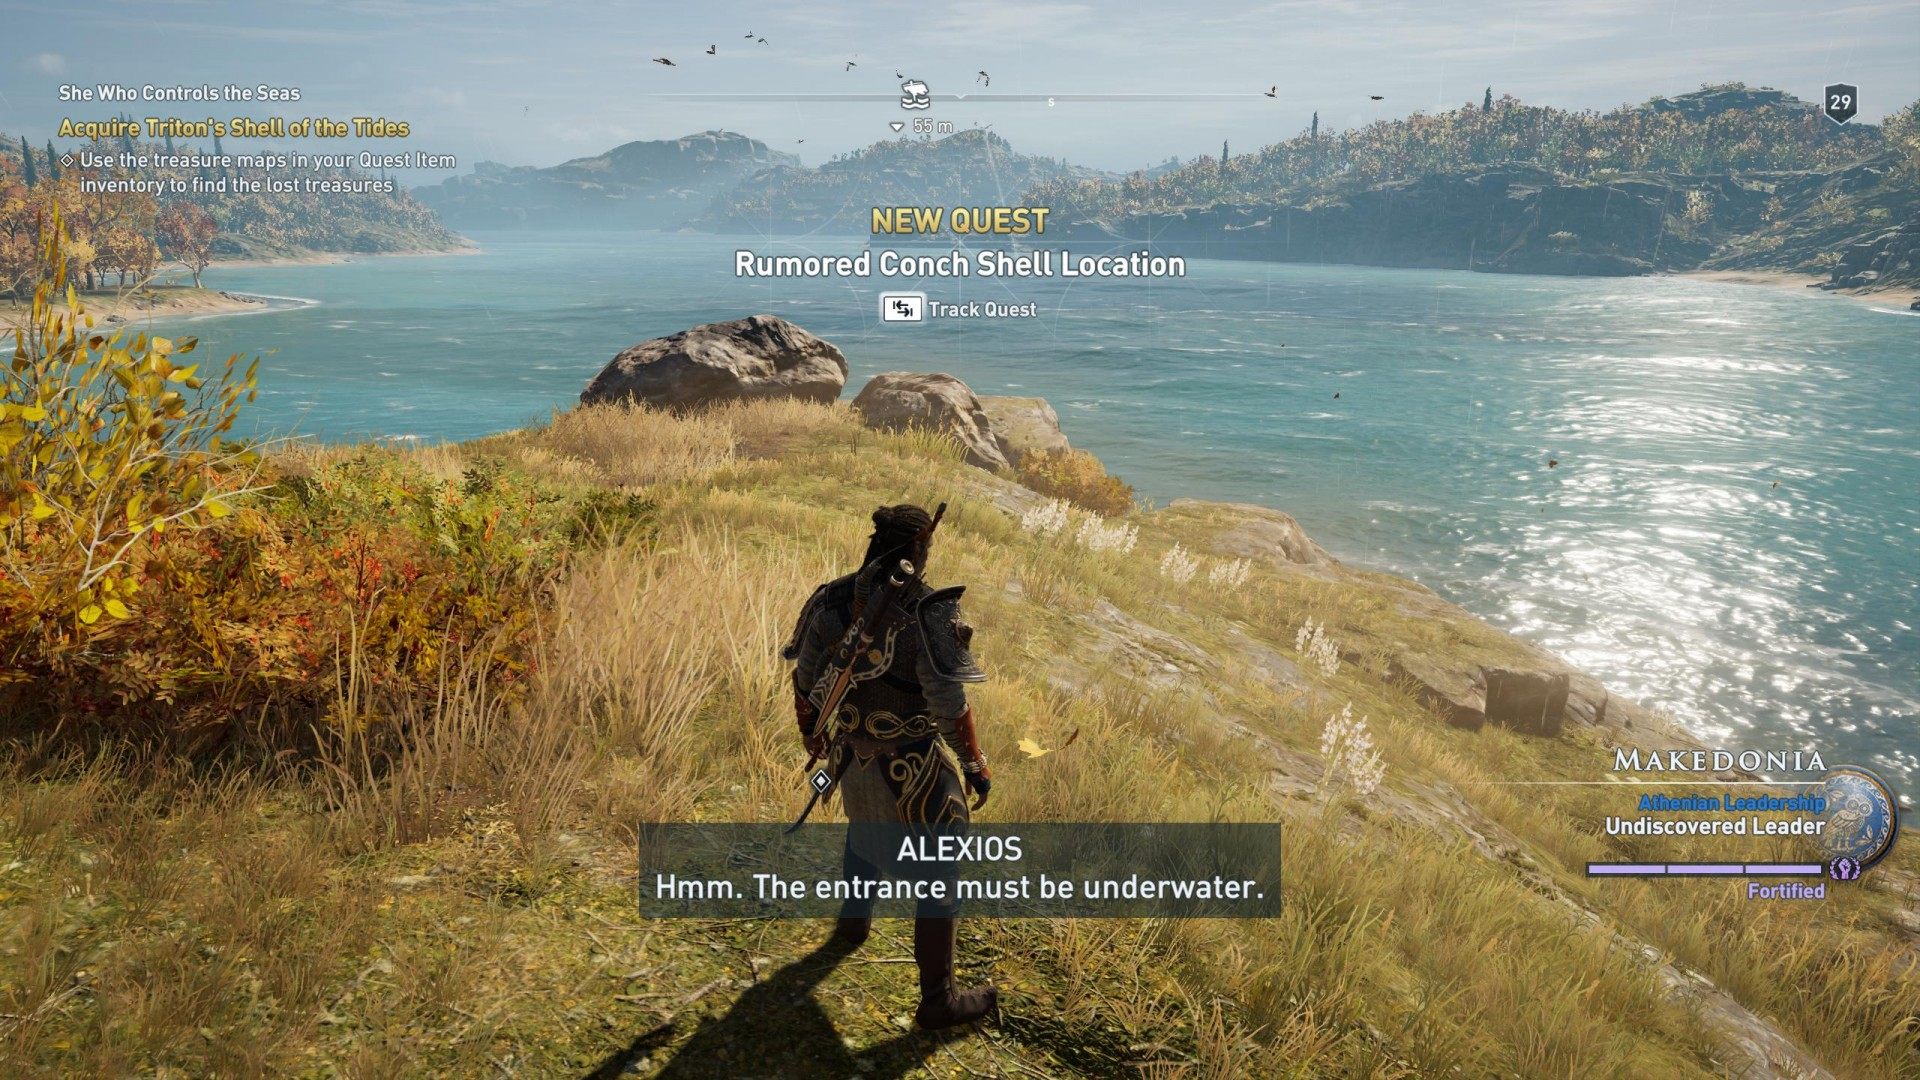 She the Seas, Assassin's Creed Odyssey Quest